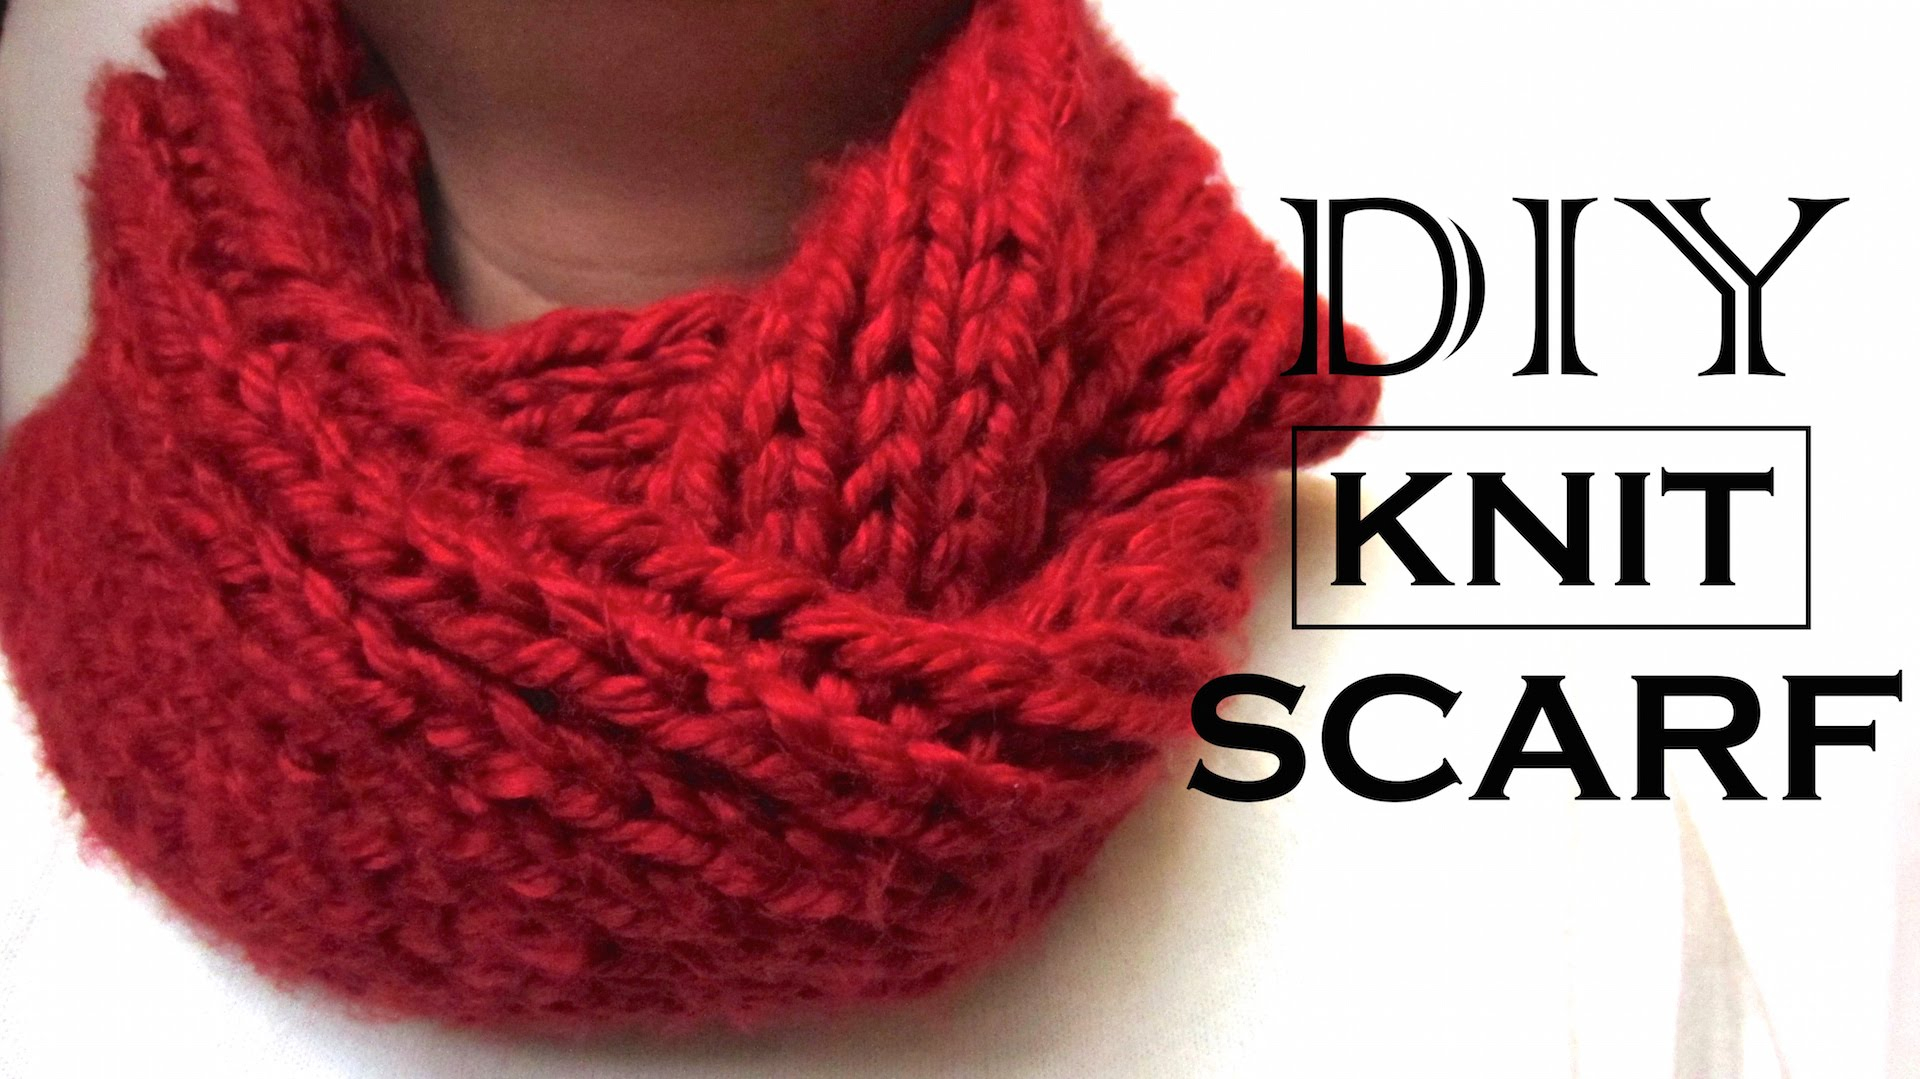 Easy Scarf Knitting Patterns For Men Diy Gifts For Men 20 Free Knitting Patterns To Take Your Loved One